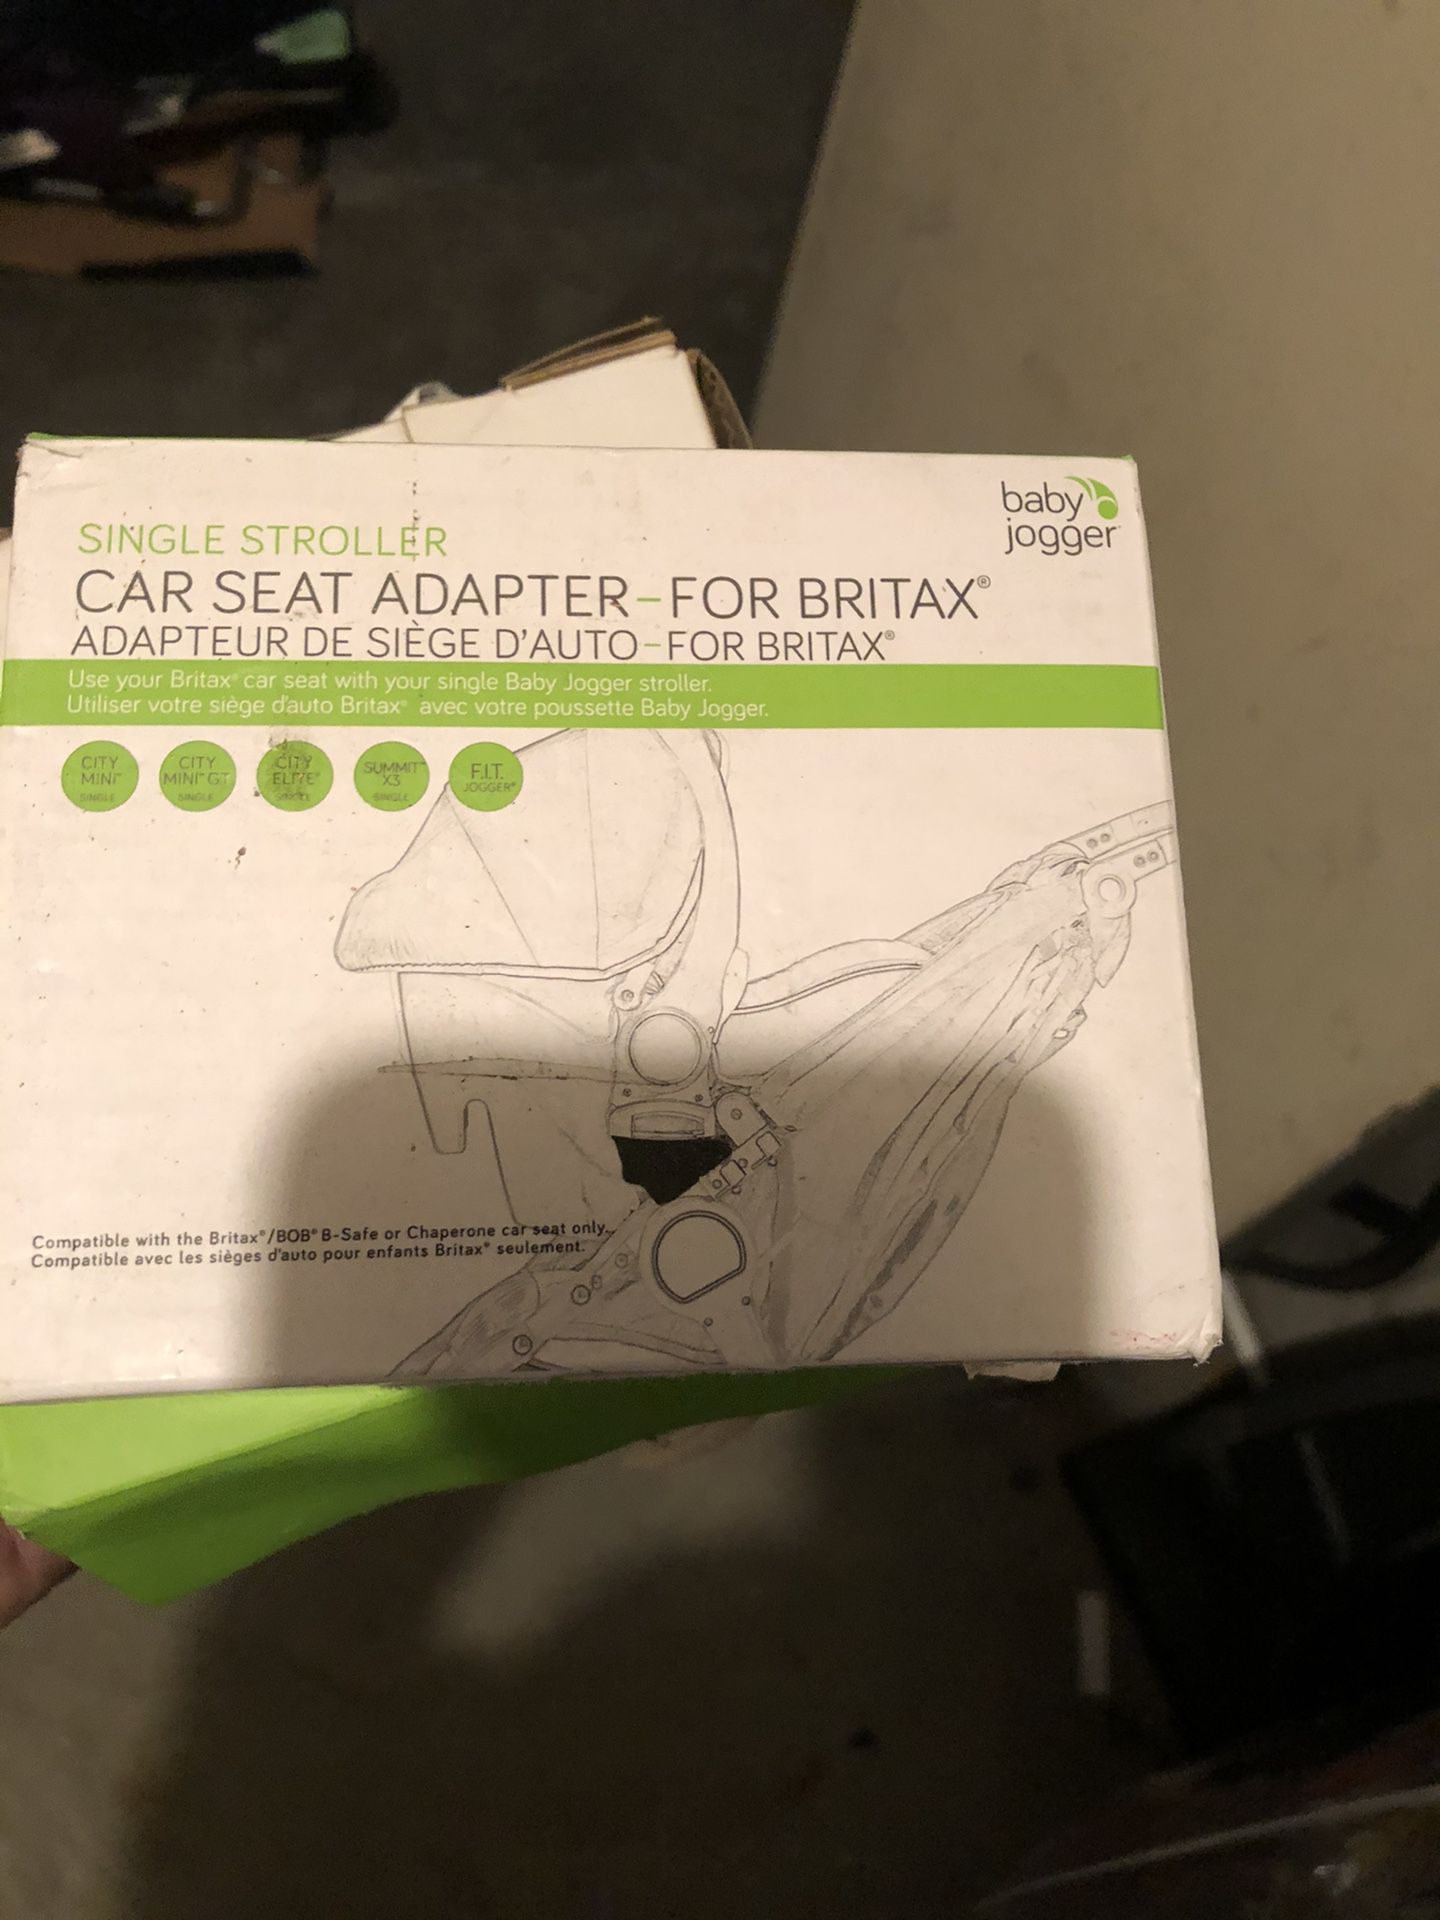 Baby jogger car seat adapter for britax single stroller